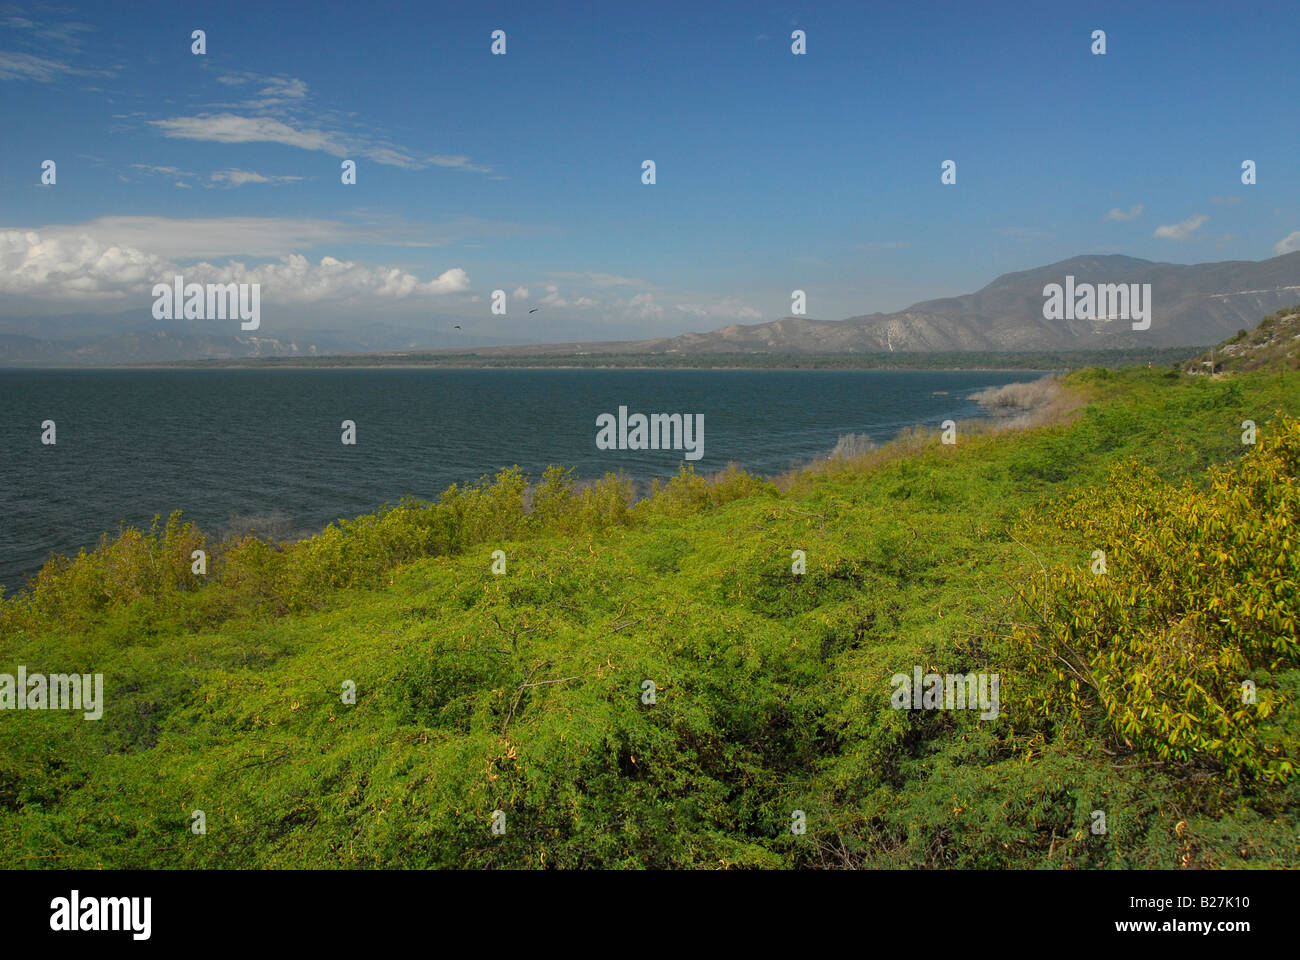 View of Lake Enriquillo, Independencia Province, Dominican Republic Stock Photo